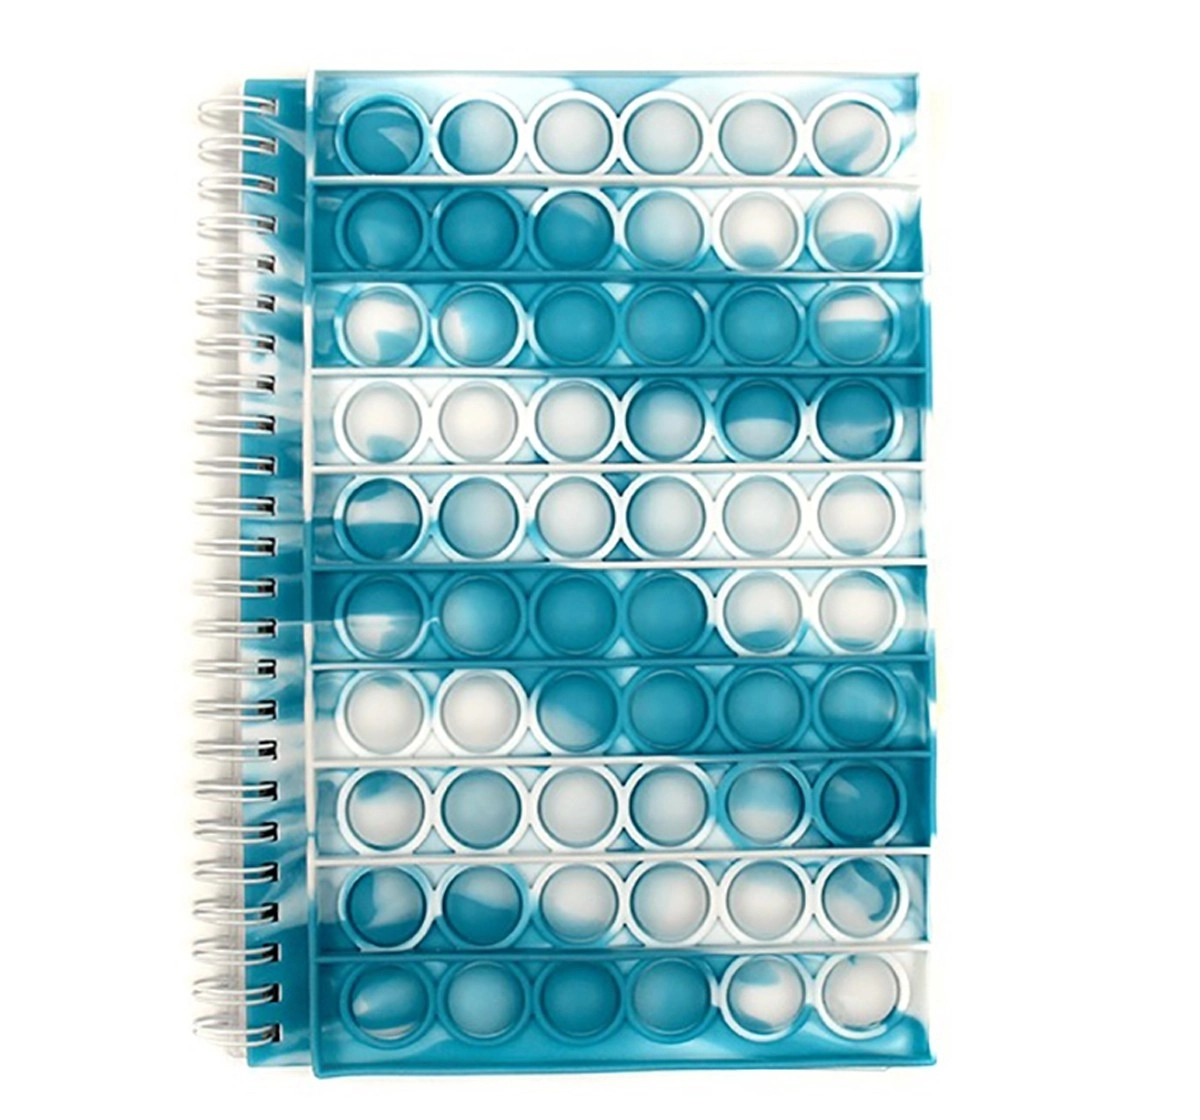 Pop It Spiral Journal Notebook/Diary by Hamster London for School Kids, Writing Book for Kids, Light Blue, 3Y+